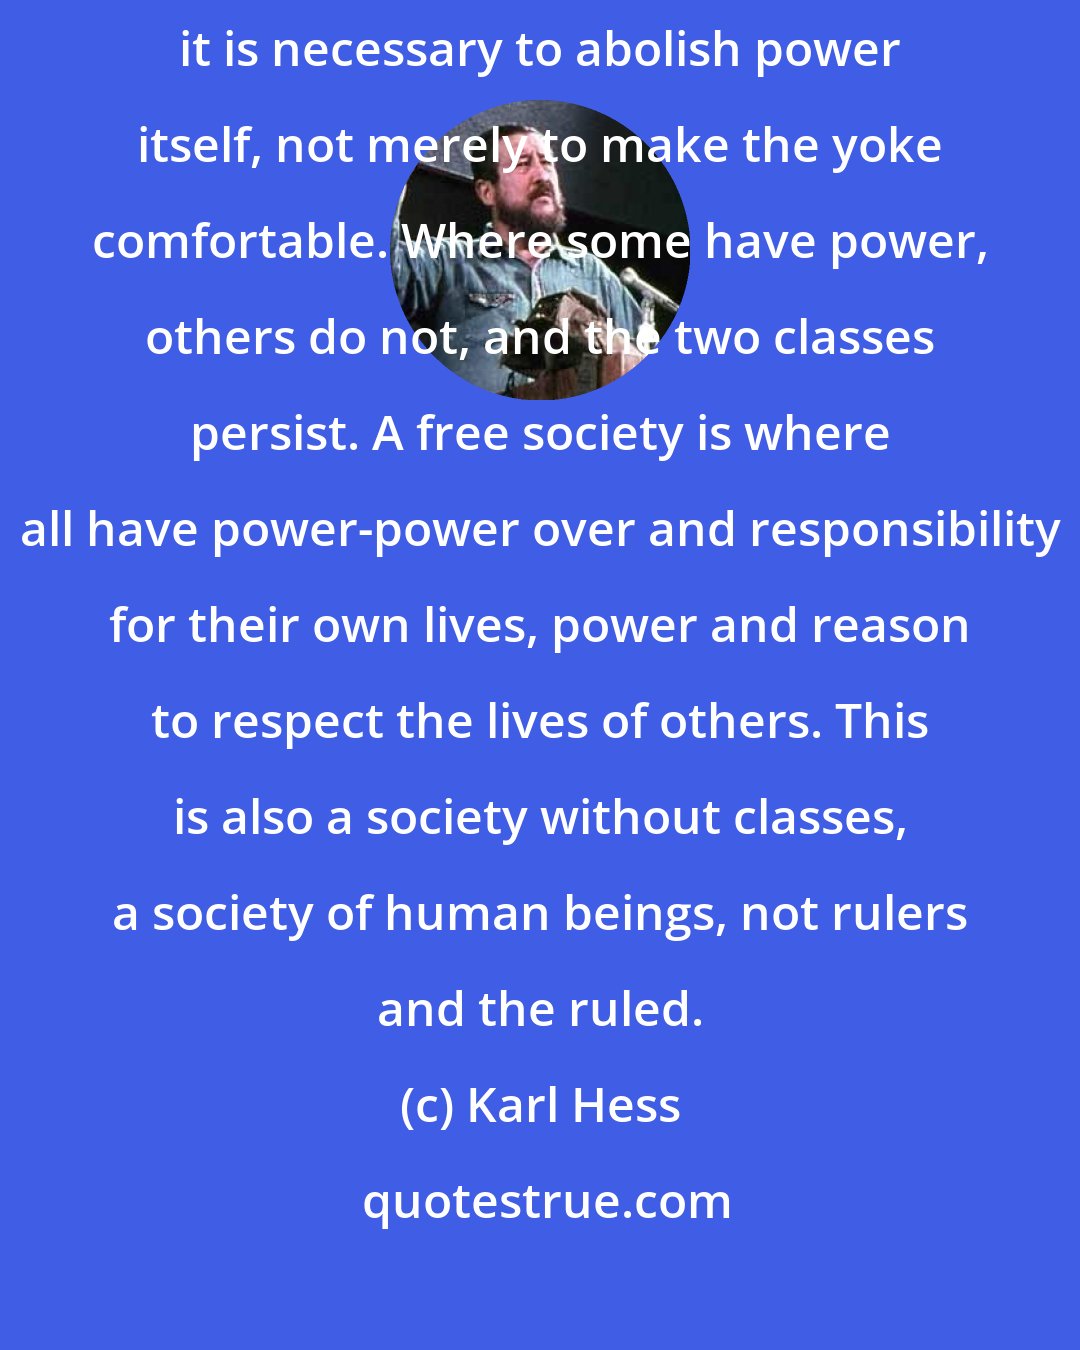 Karl Hess: For loving, working, and creative people to throw off the yoke of power it is necessary to abolish power itself, not merely to make the yoke comfortable. Where some have power, others do not, and the two classes persist. A free society is where all have power-power over and responsibility for their own lives, power and reason to respect the lives of others. This is also a society without classes, a society of human beings, not rulers and the ruled.